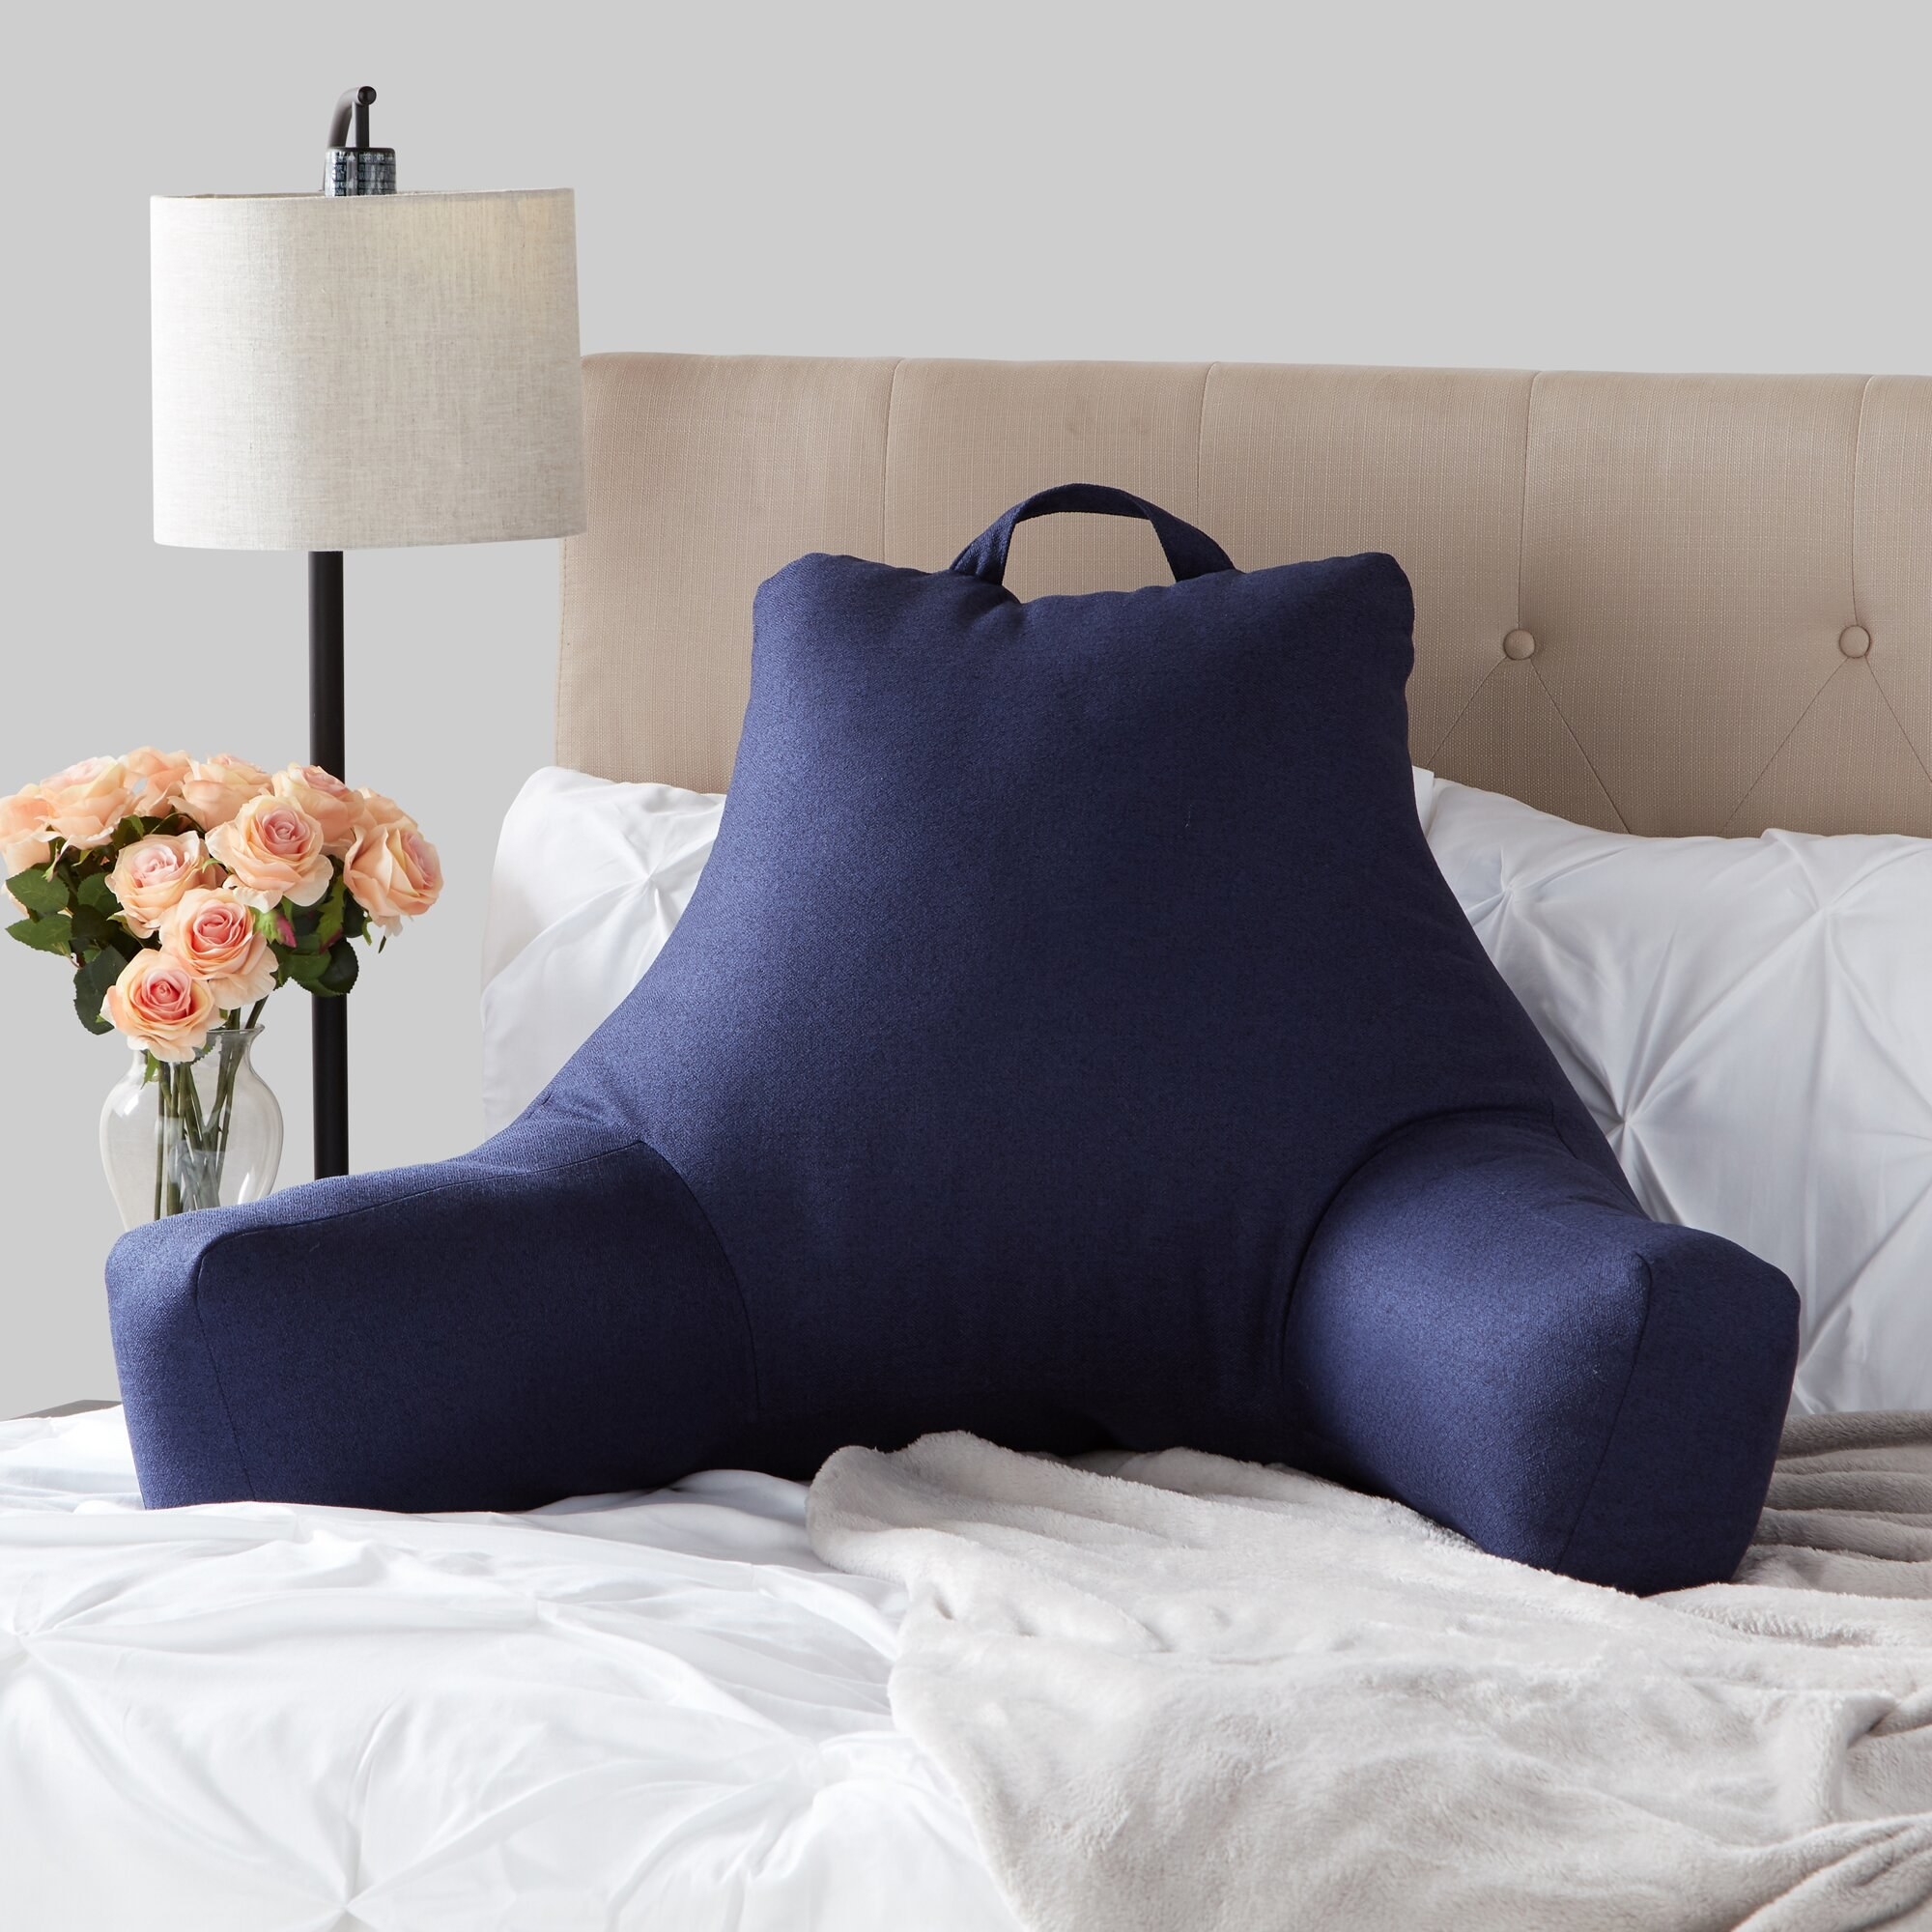 The dark blue backrest pillow on a bed